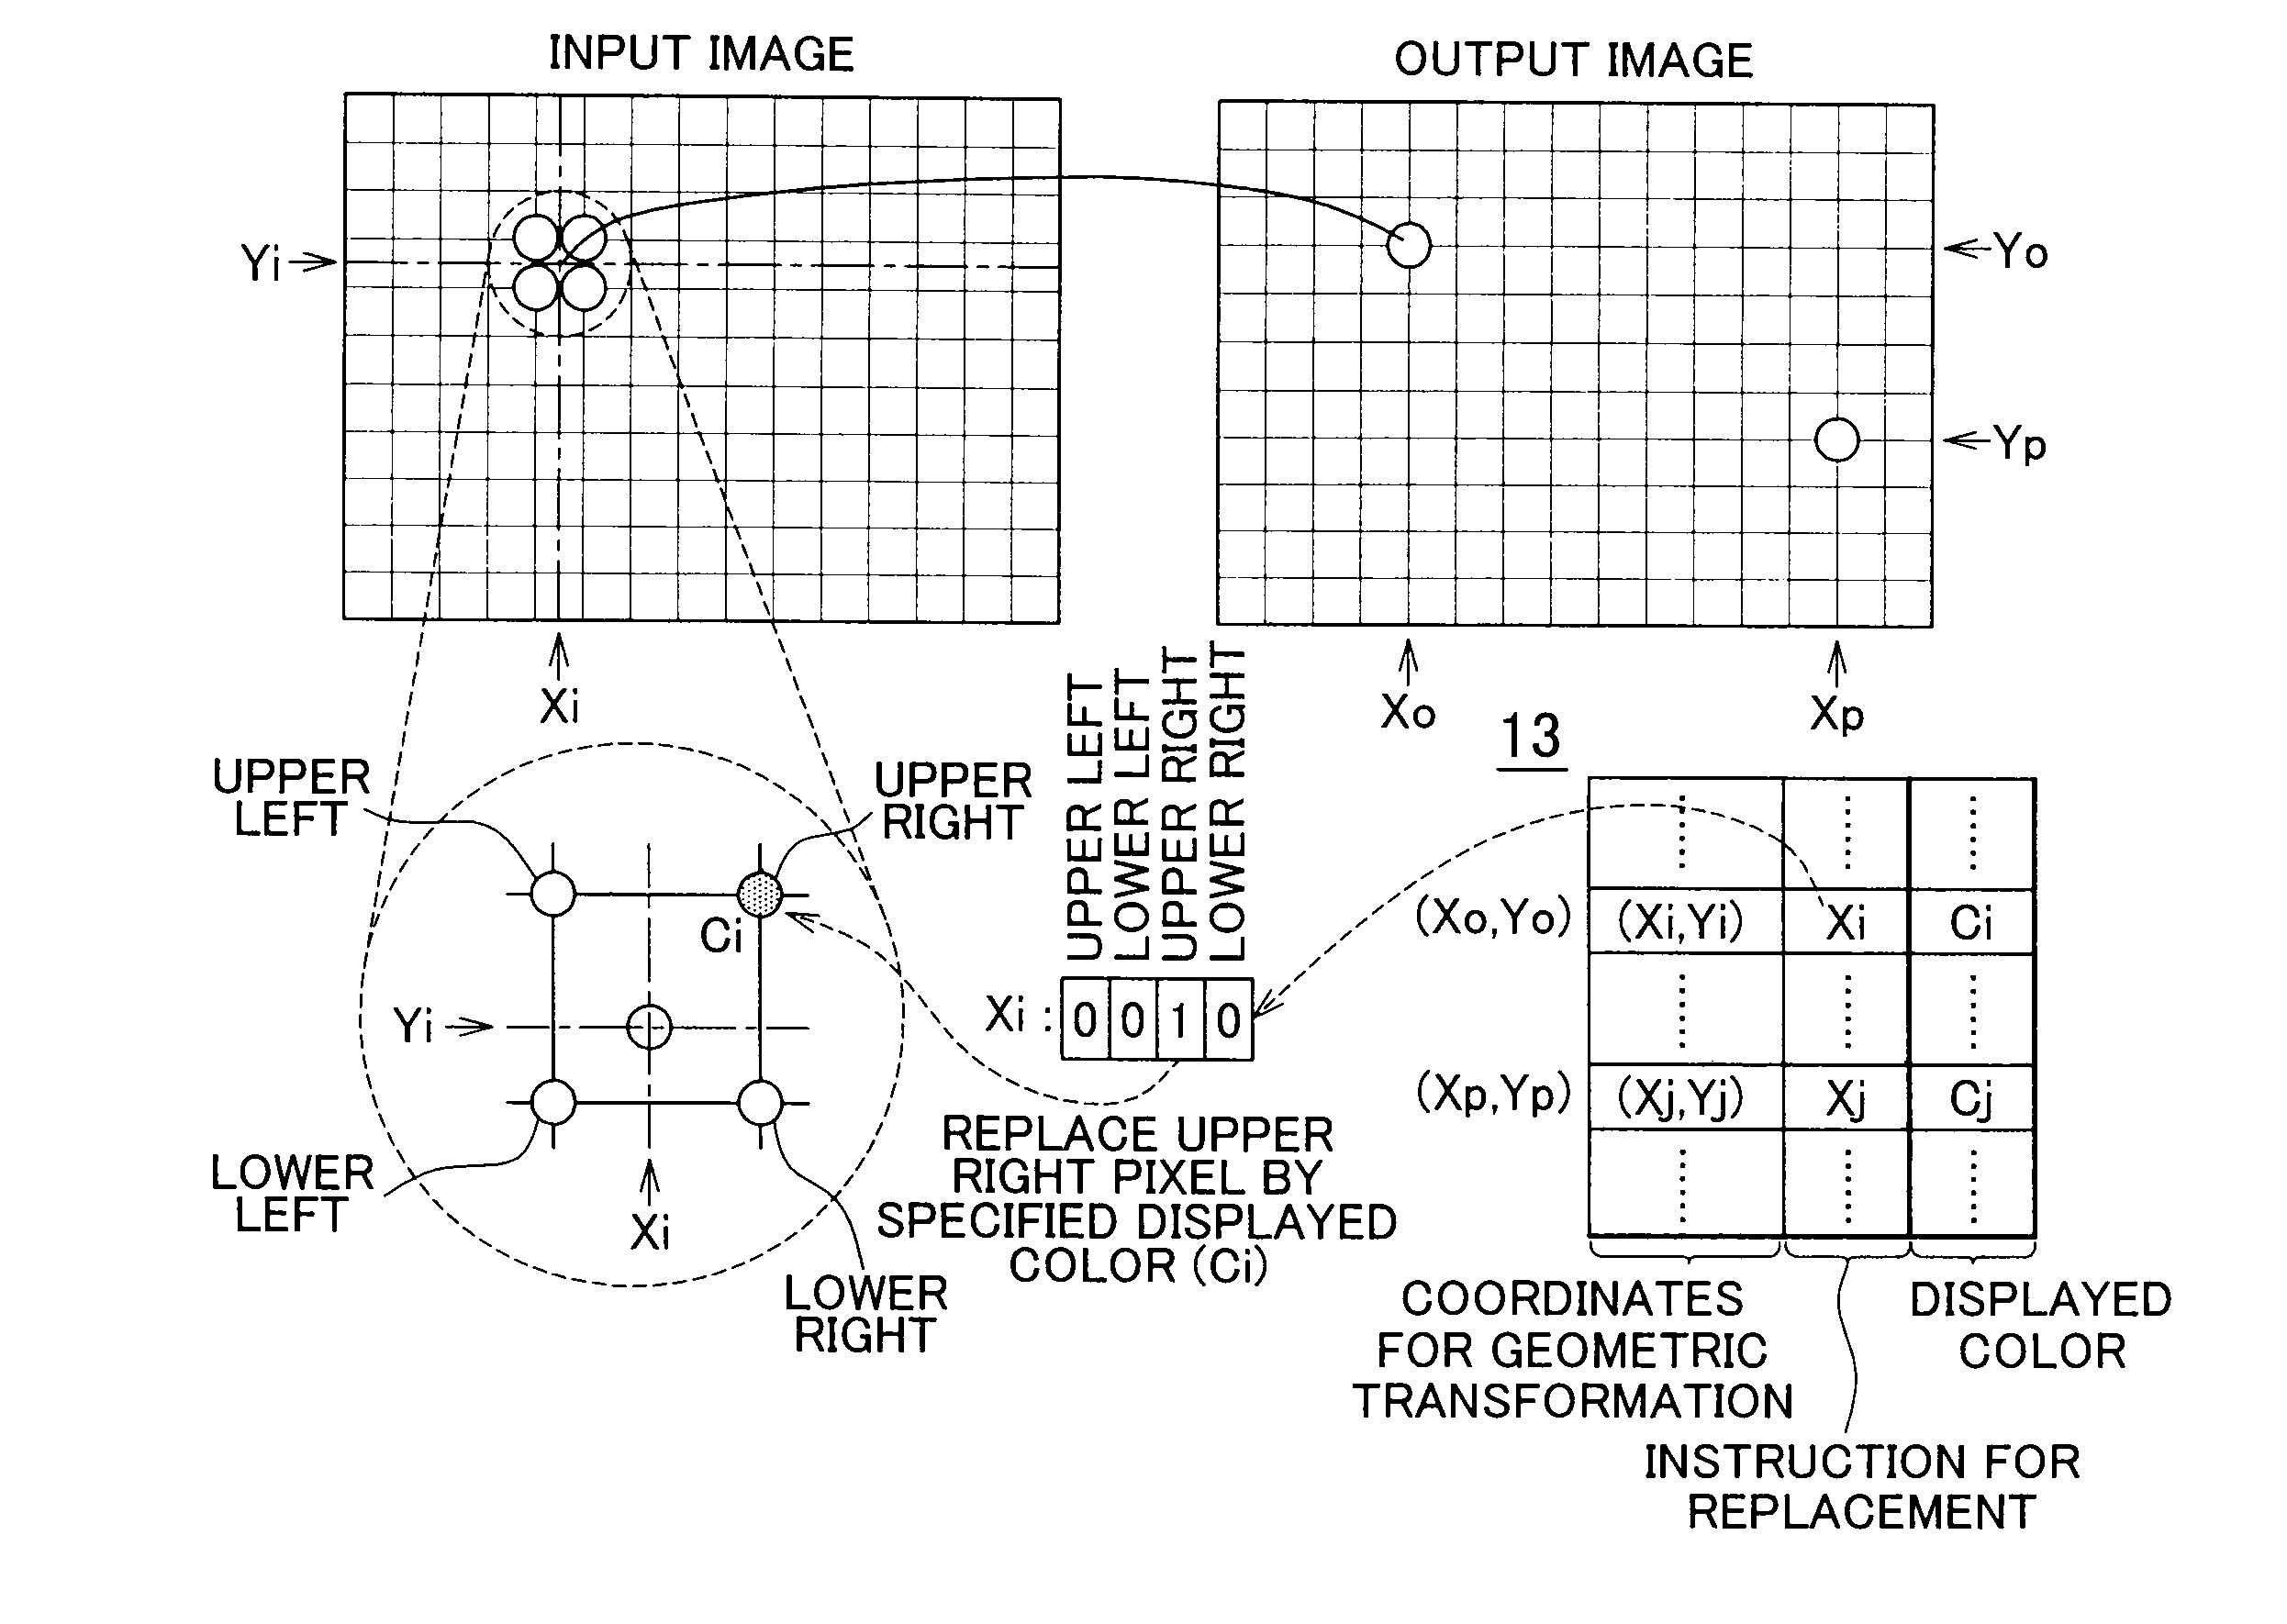 Composite image-generating device and computer-readable medium storing program for causing computer to function as composite image-generating device